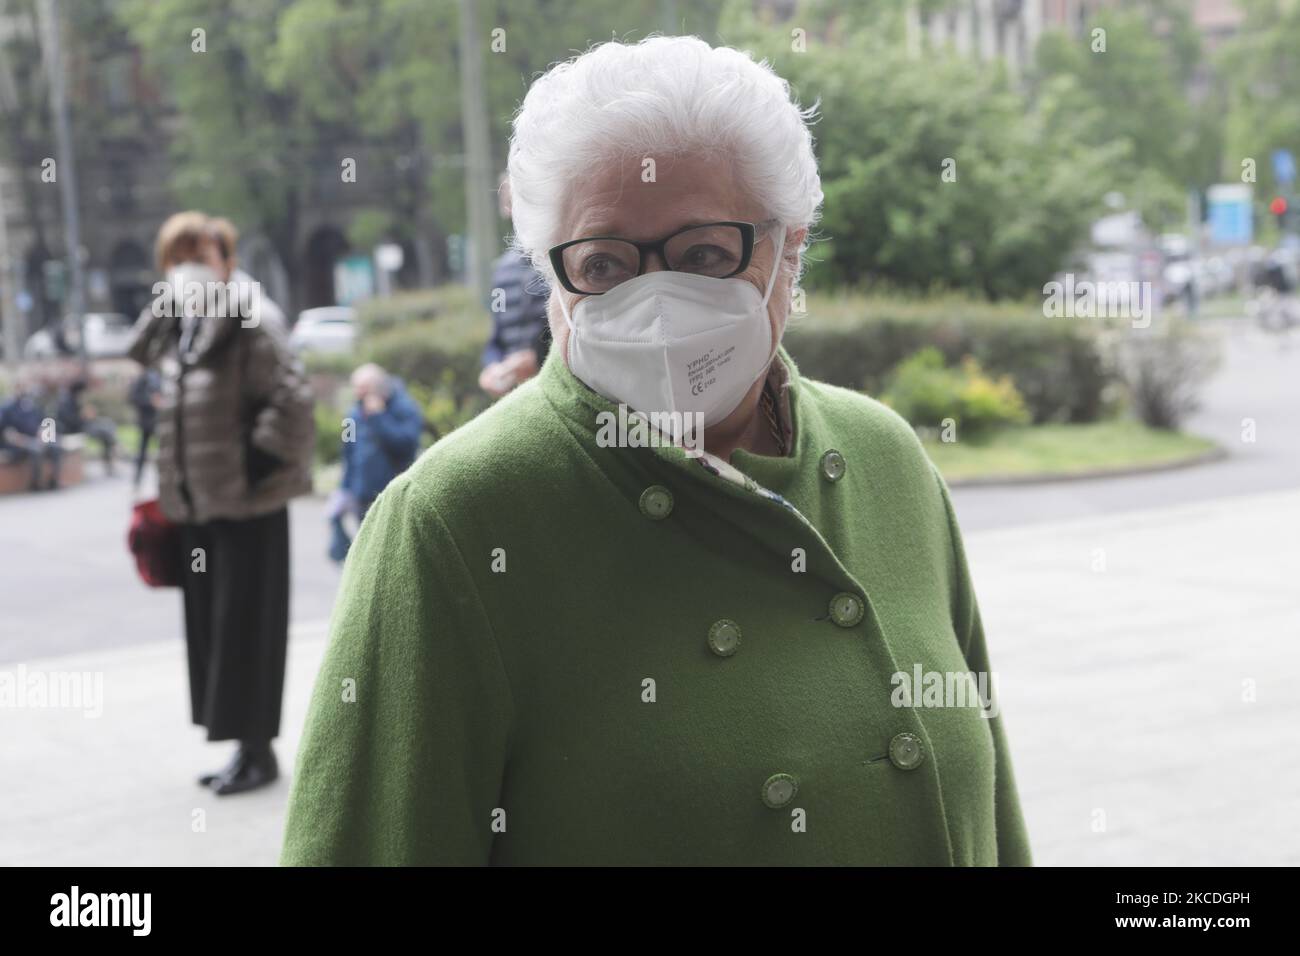 Lidia Pomodoro is seen at the Burial chamber of Italian singer Milva at Teatro Strehler in Milan, Italy on April 27, 2021. (Photo by Mairo Cinquetti/NurPhoto) Stock Photo